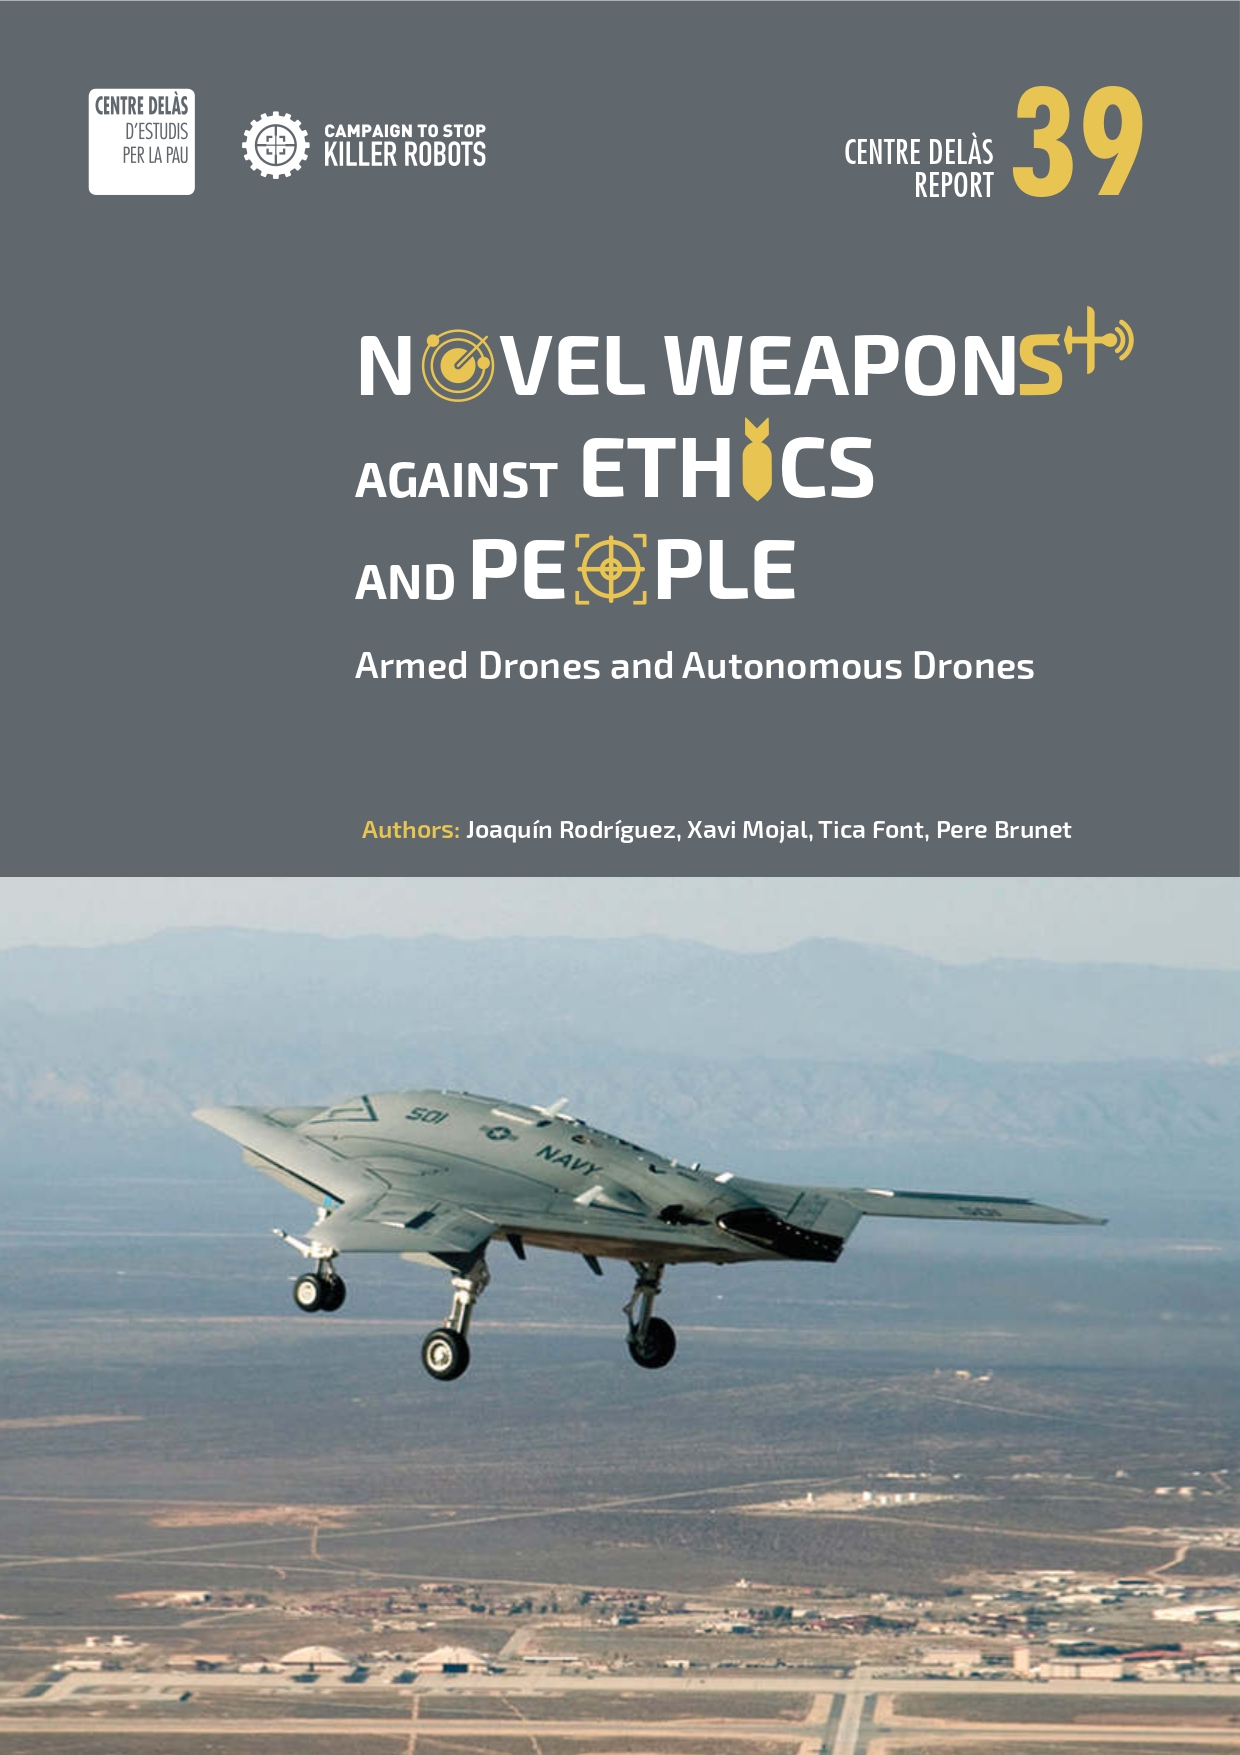 Report 39: Novel weapons against ethics and people. Armed Drones and Autonomous Drones